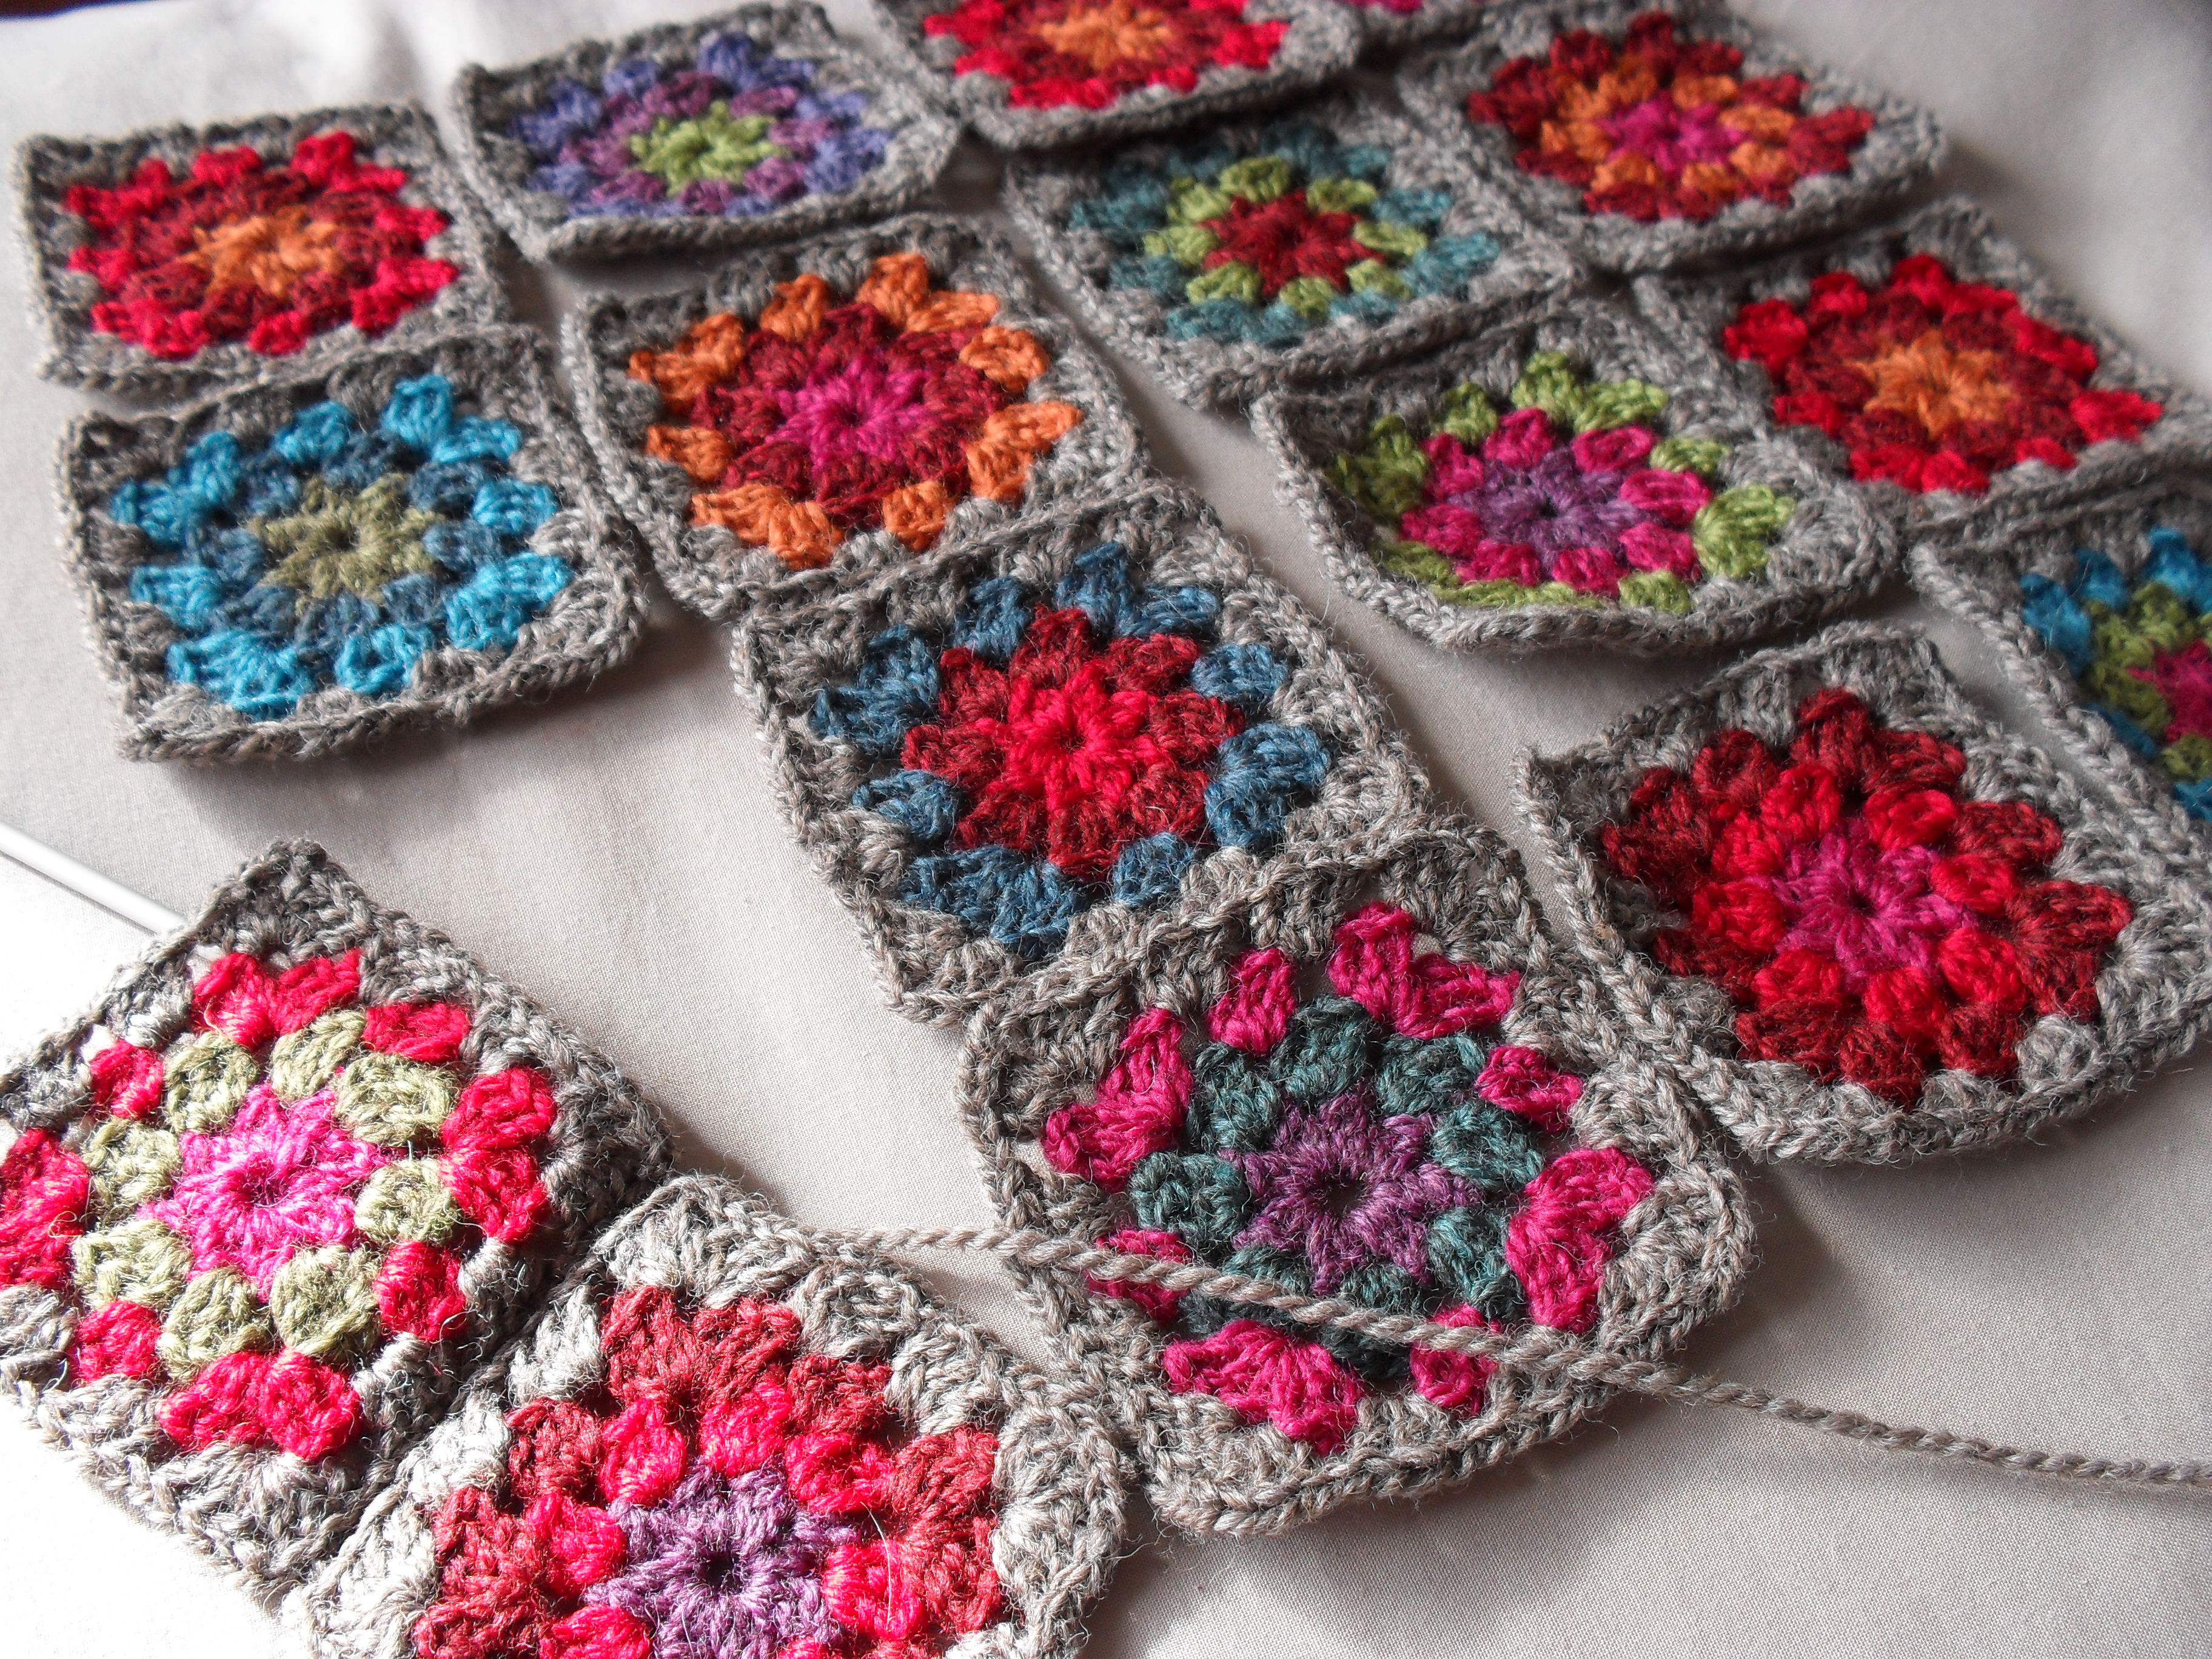 Related Images for Crochet Granny Square Together.